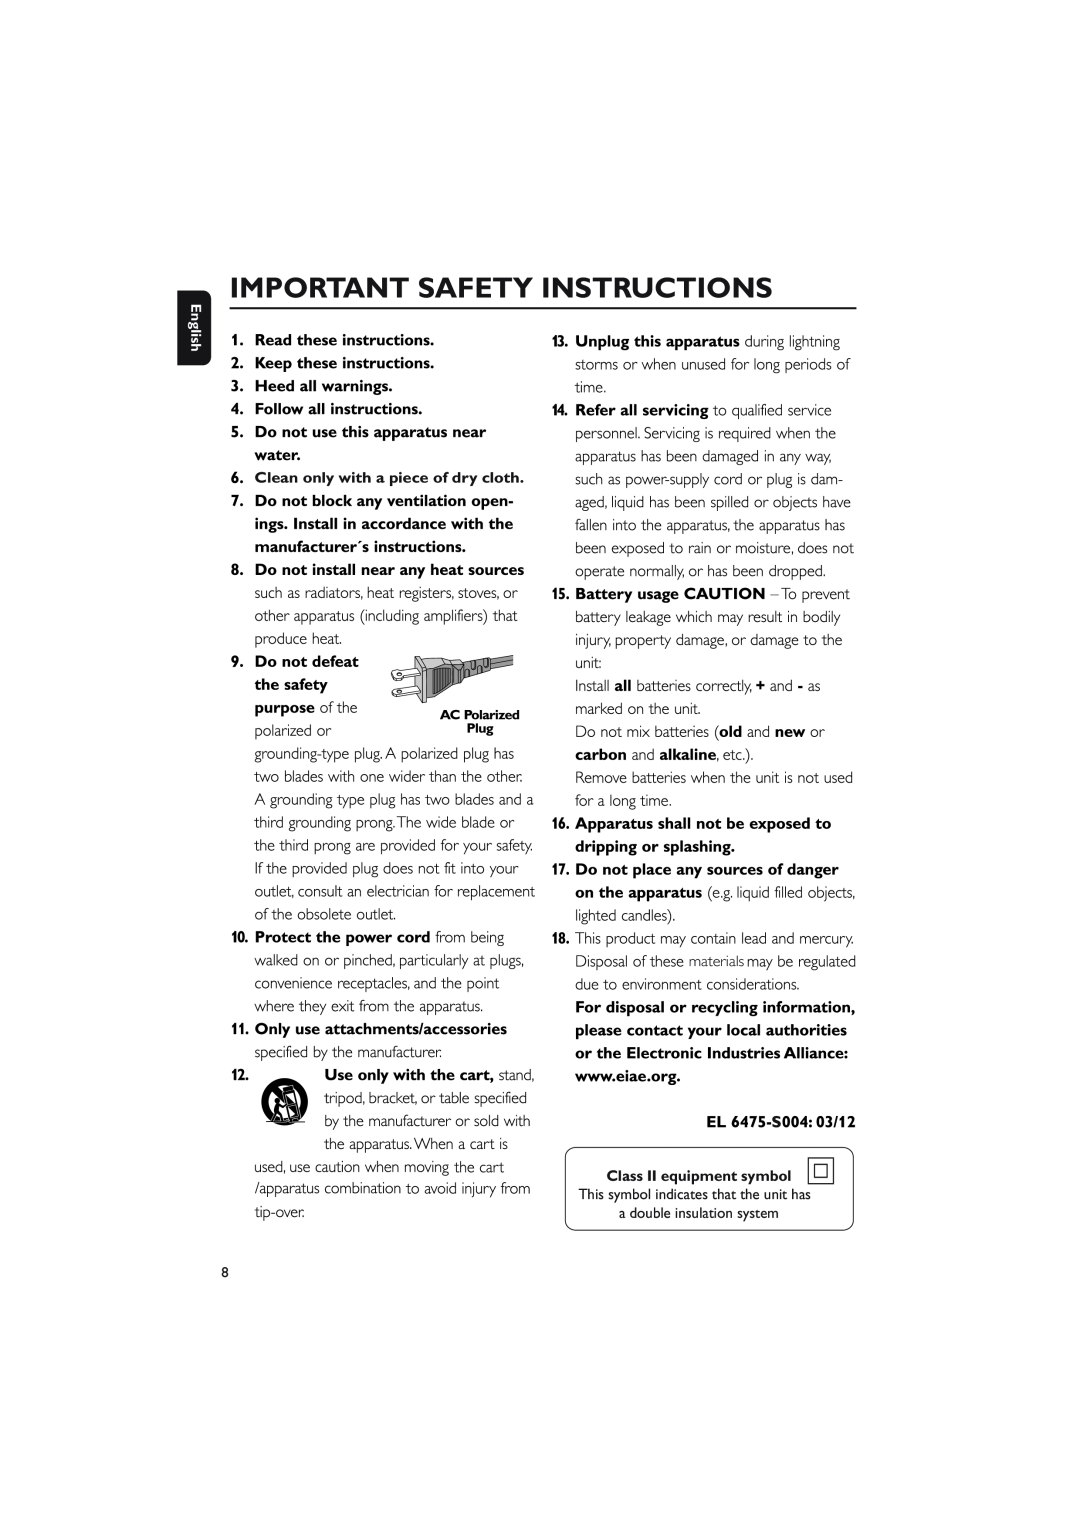 Philips MCM760 Important Safety Instructions, English, Clean only with a piece of dry cloth, Class II equipment symbol 